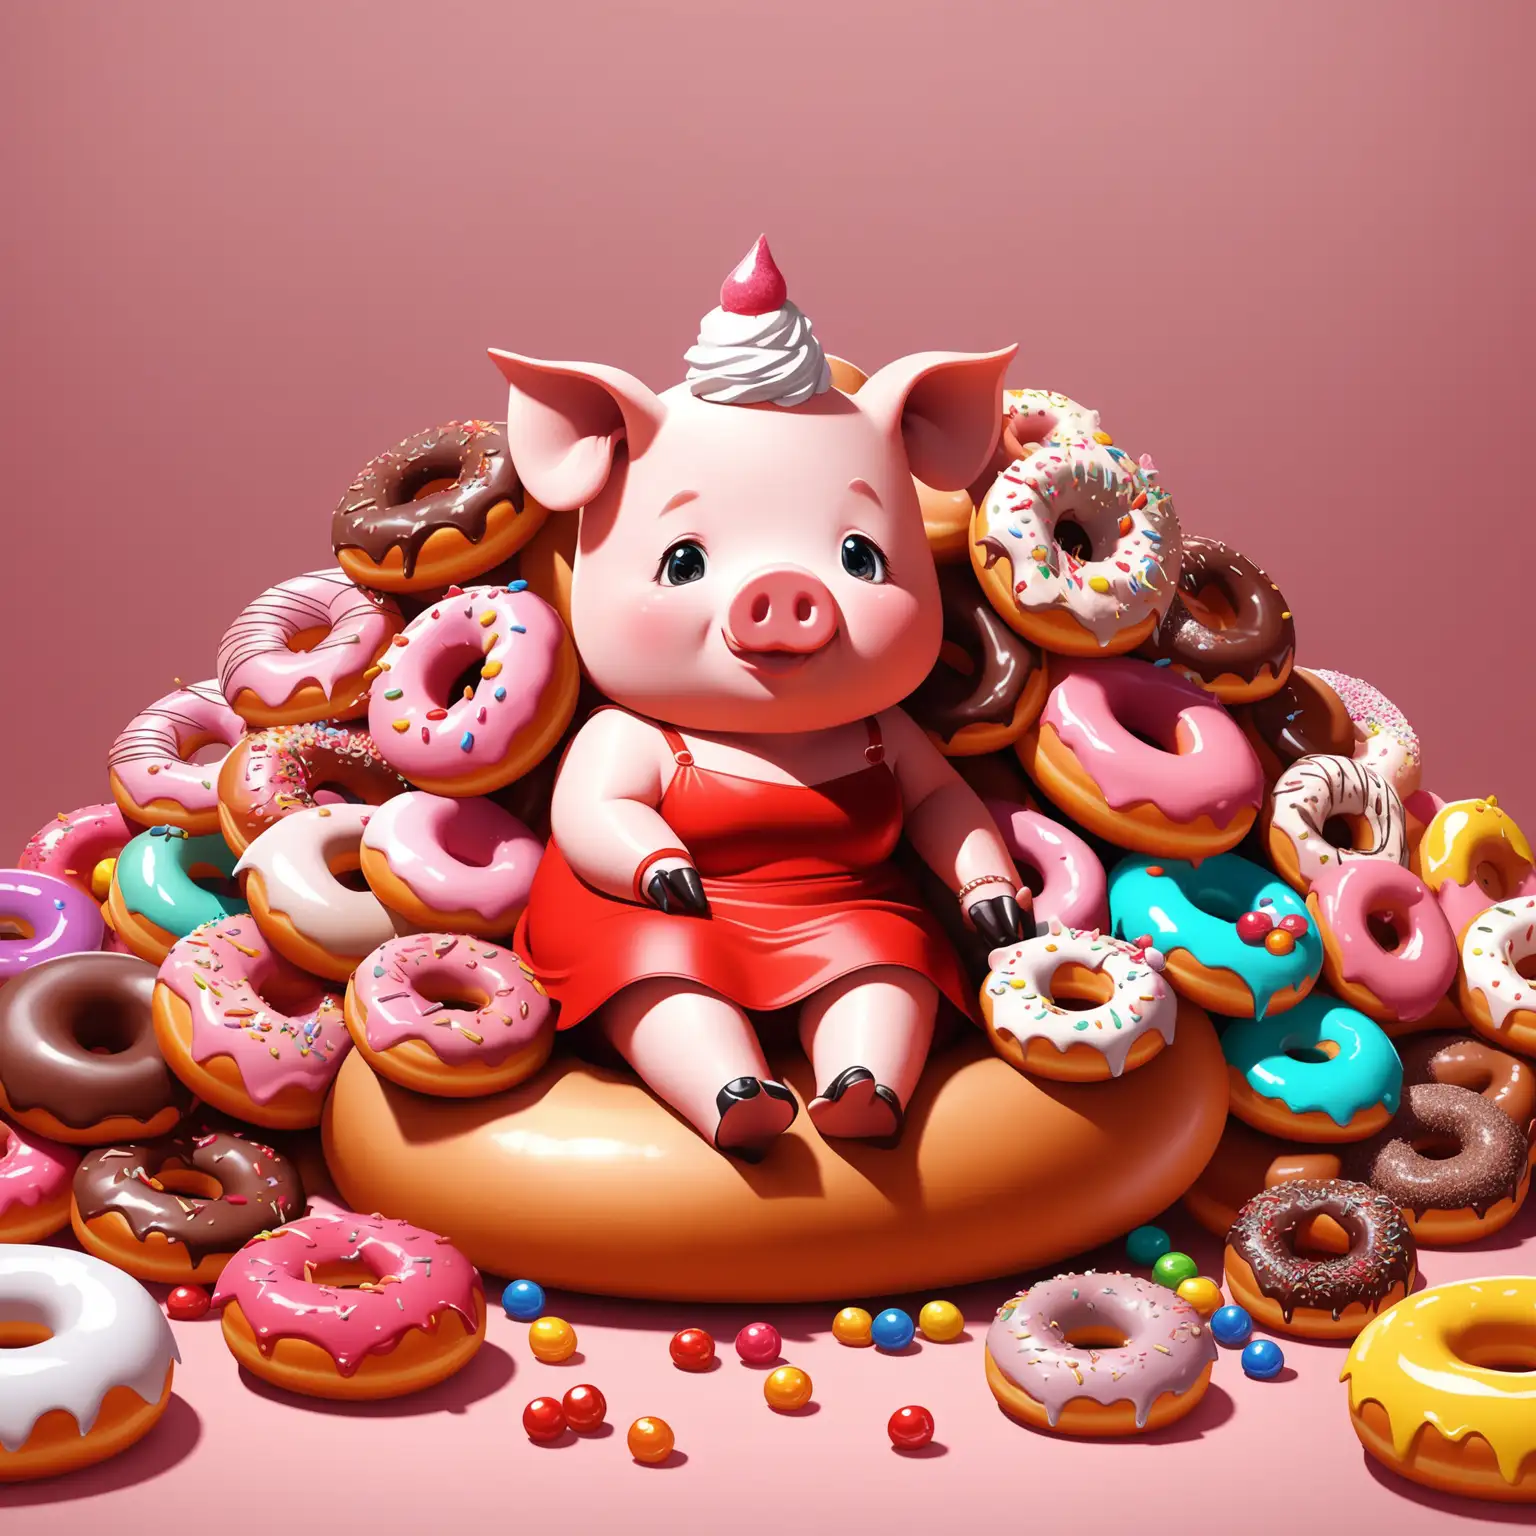 little cute pig sit on donut heap, ice cream on background, red dress on pig, stylish, artstation, many donuts, many candies